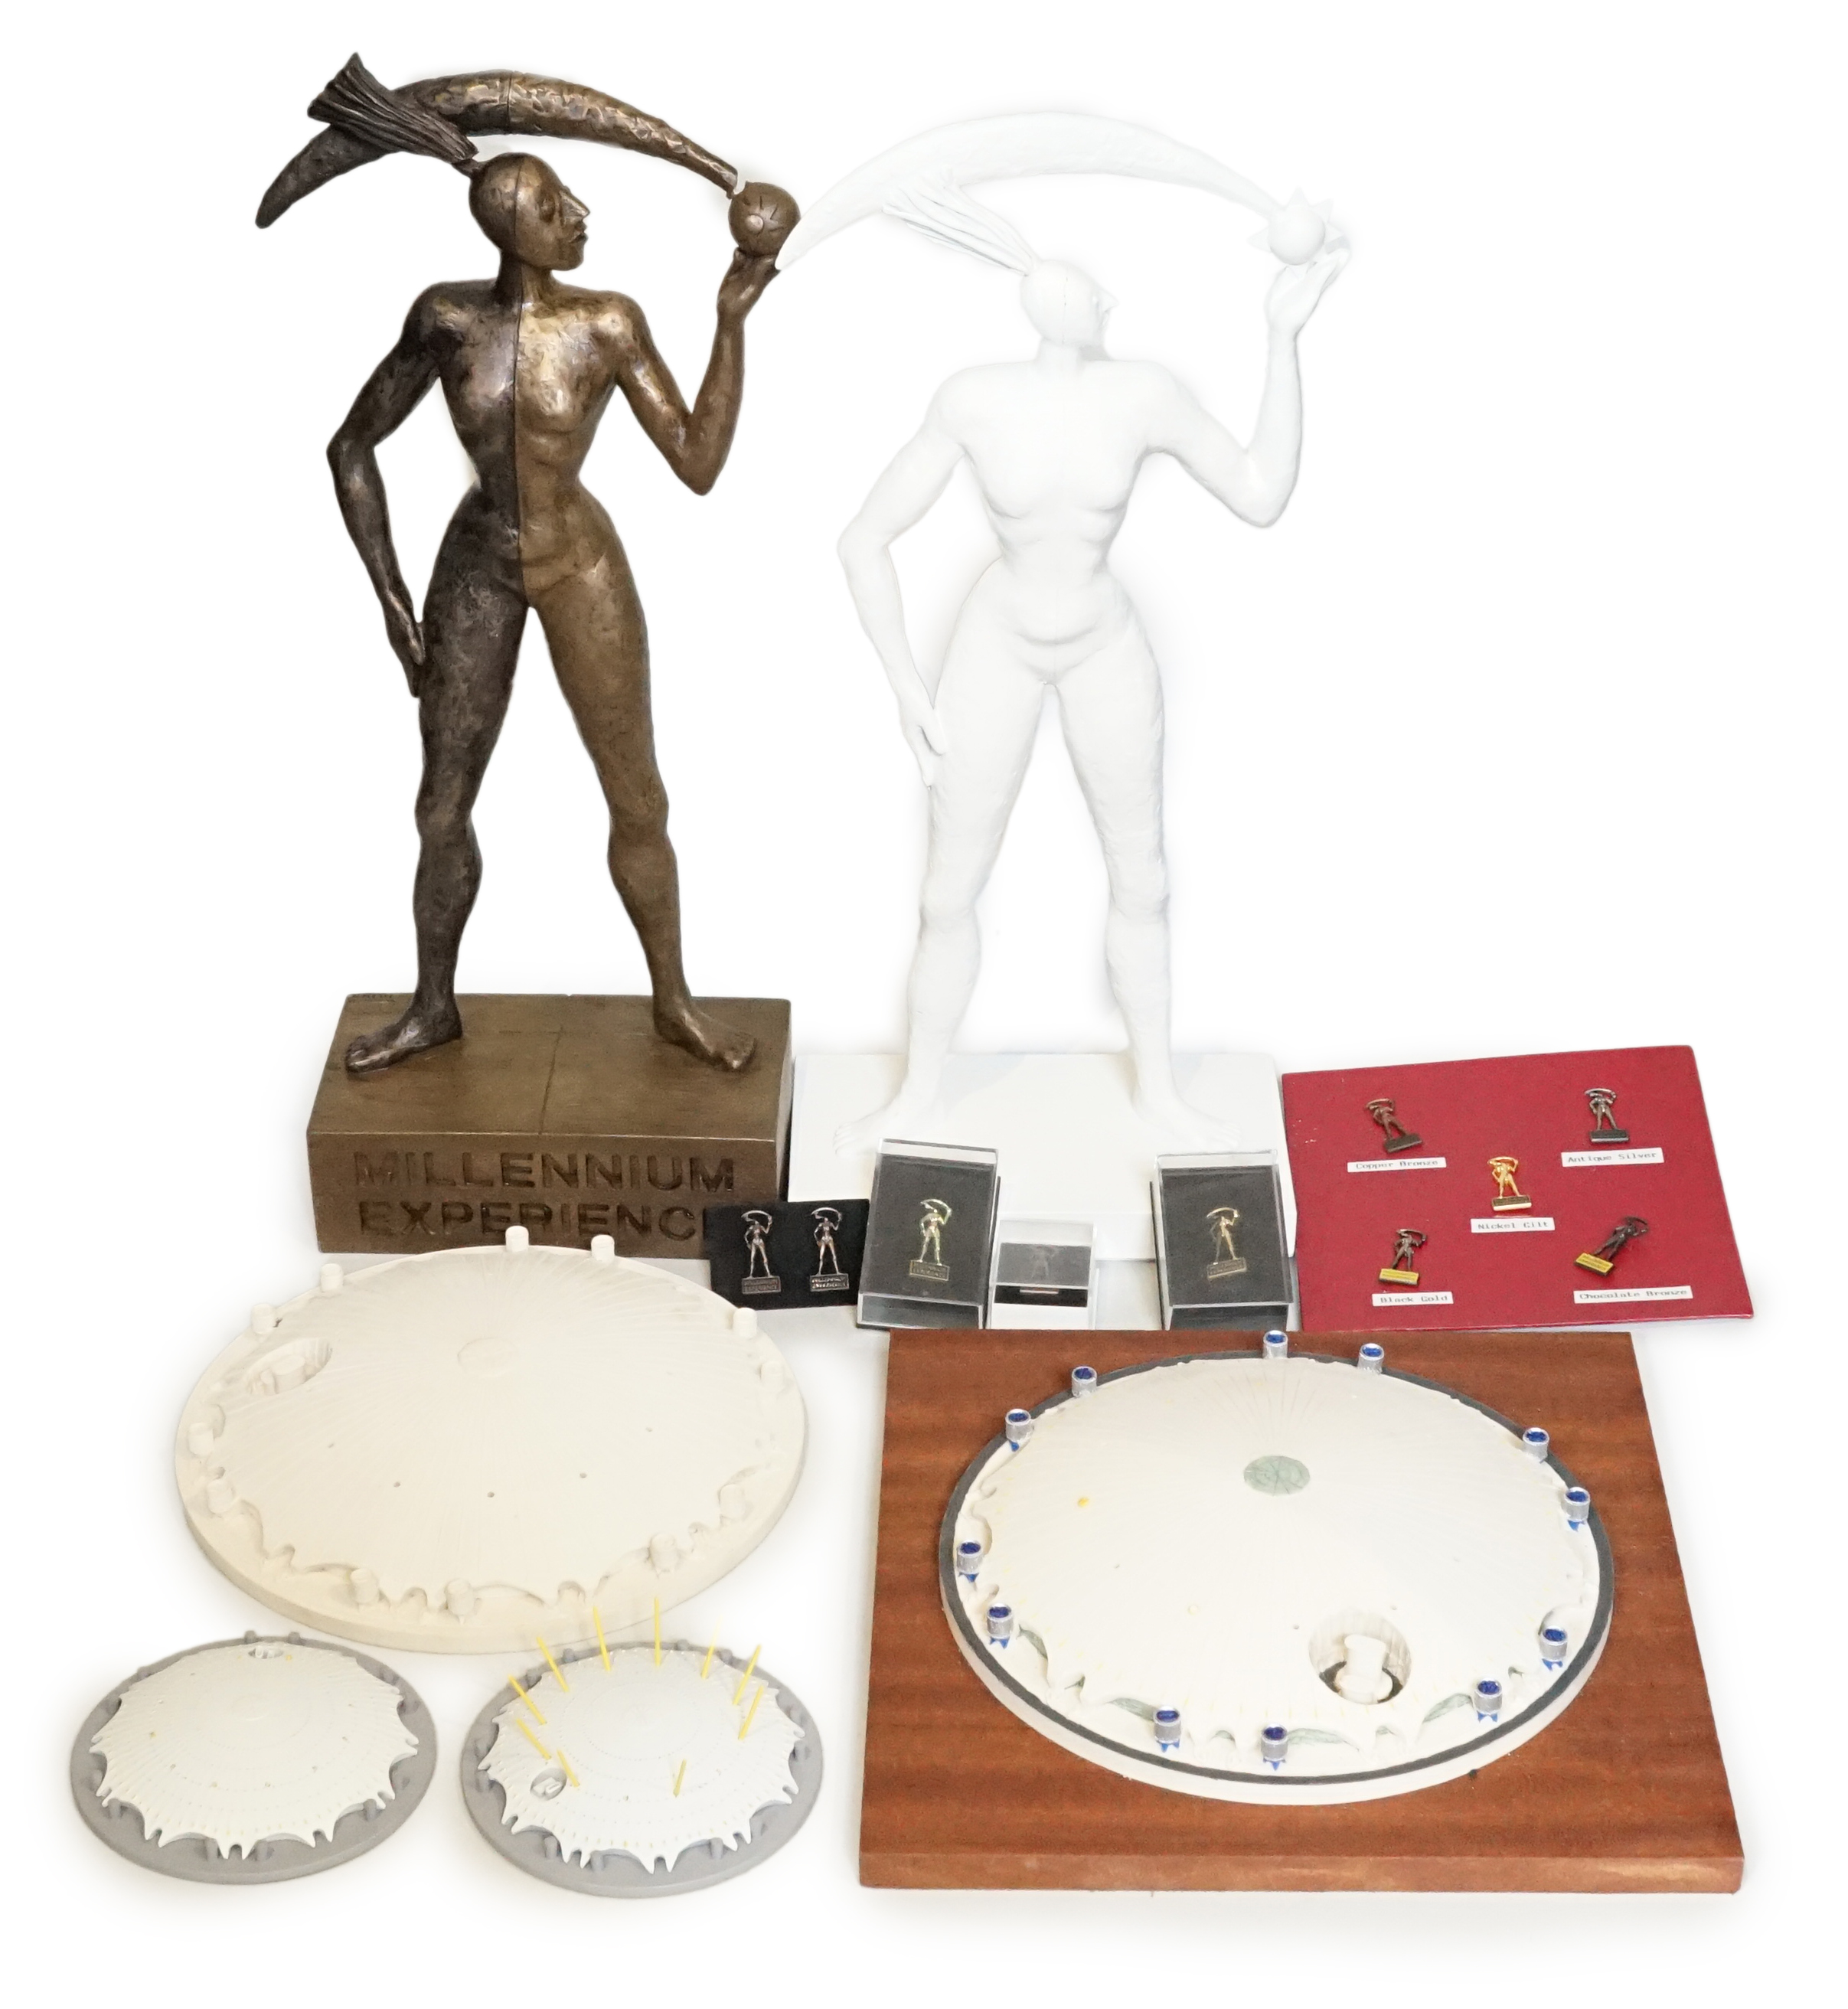 Two prototype diecast Millennium Dome models, other prototype Millennium Dome resin models and two unique Millennium Experience figures for pin development, designed by Mark Reddy, one plaster cast from clay